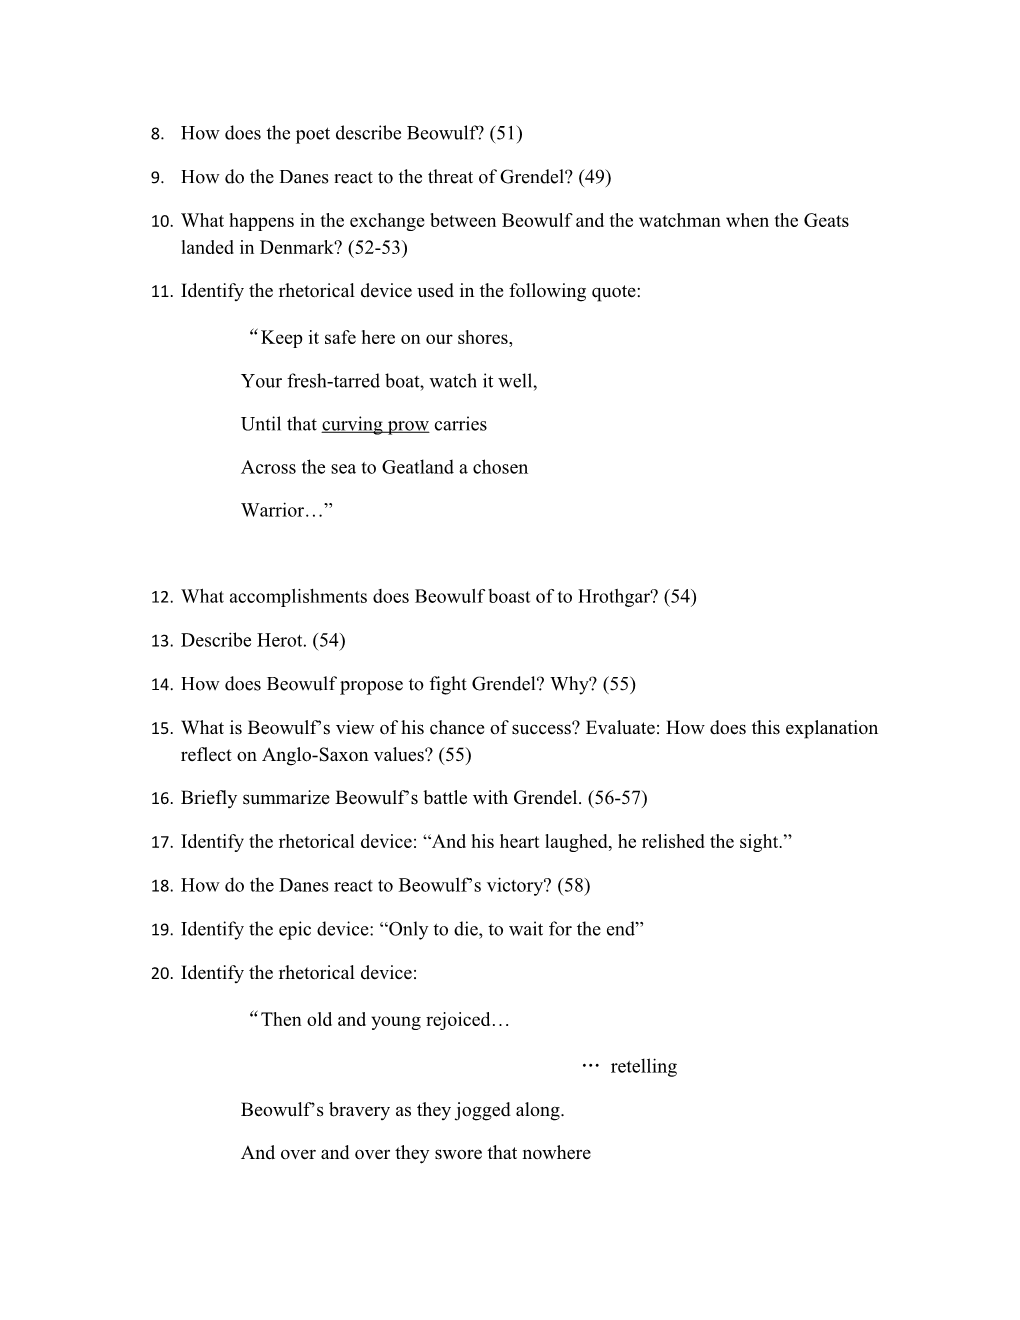 Beowulf Study Guide Questions with Page References